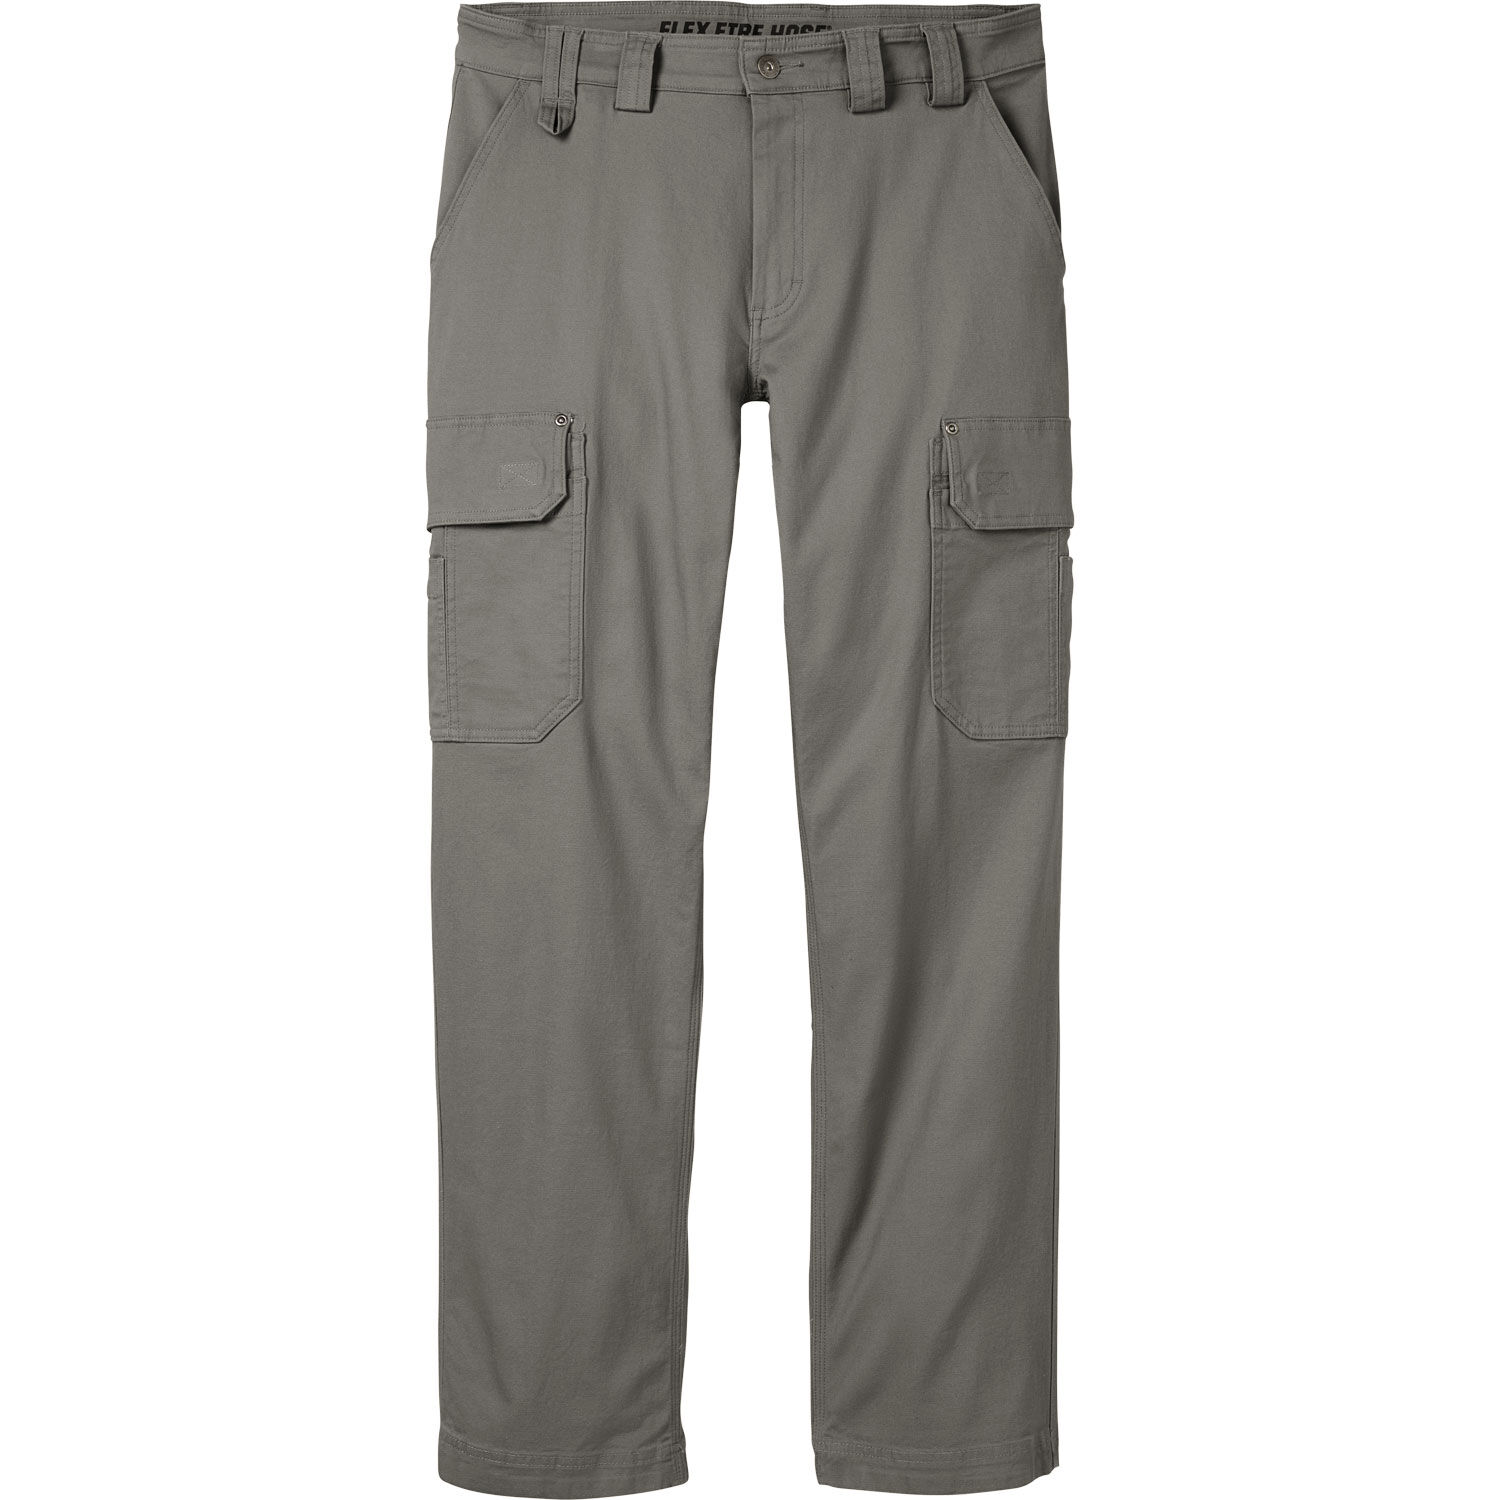 Ripstop Pants for Tall Men | American Tall